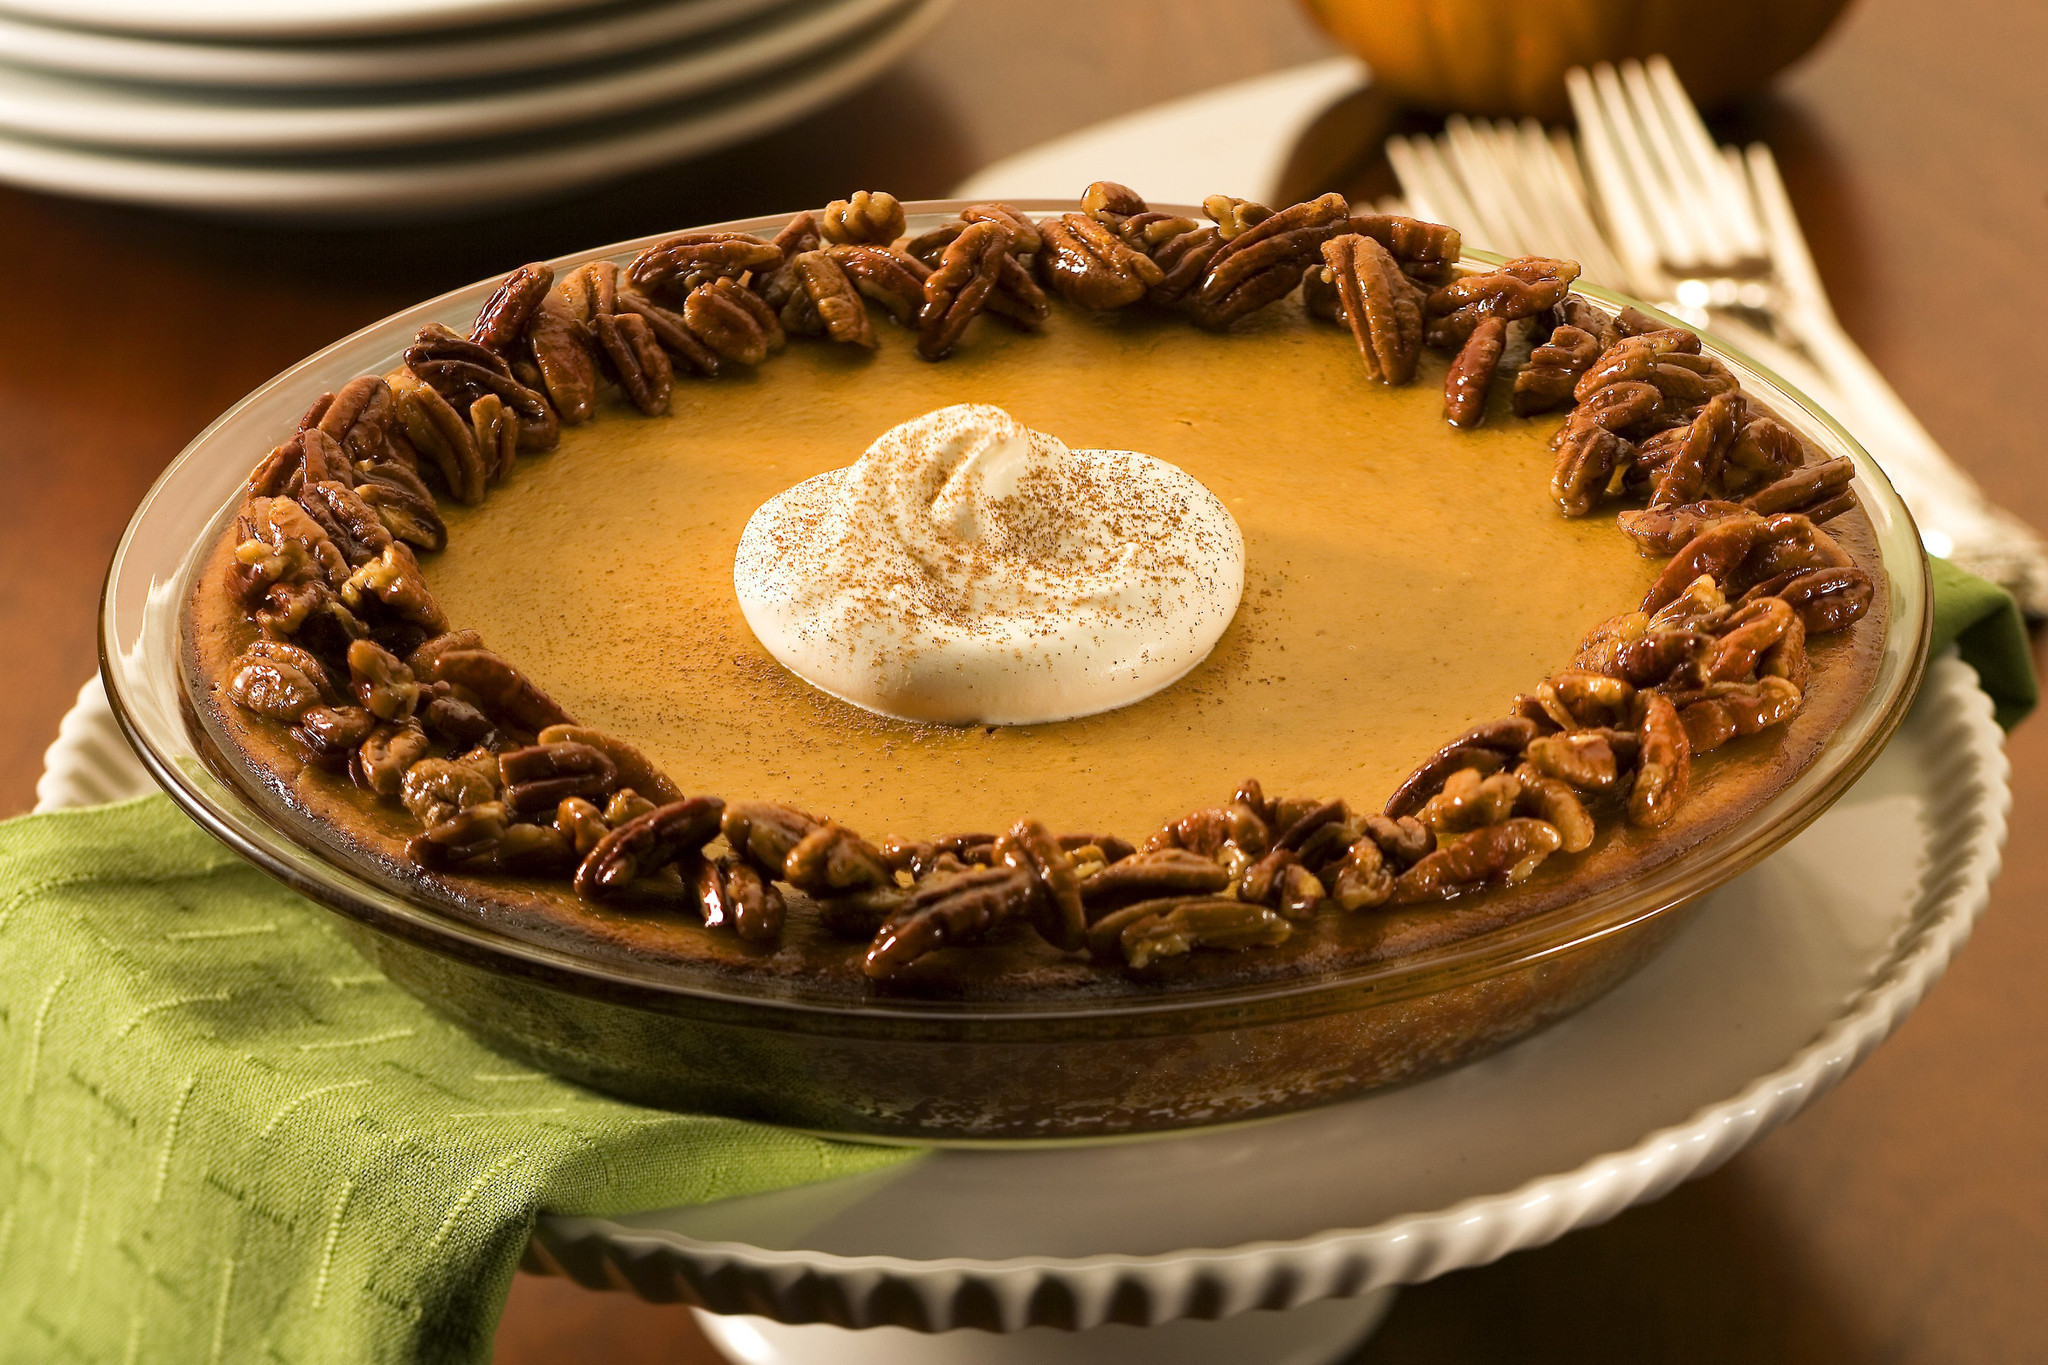 Order Pies For Thanksgiving
 8 bakeries where you can order Thanksgiving pie ahead